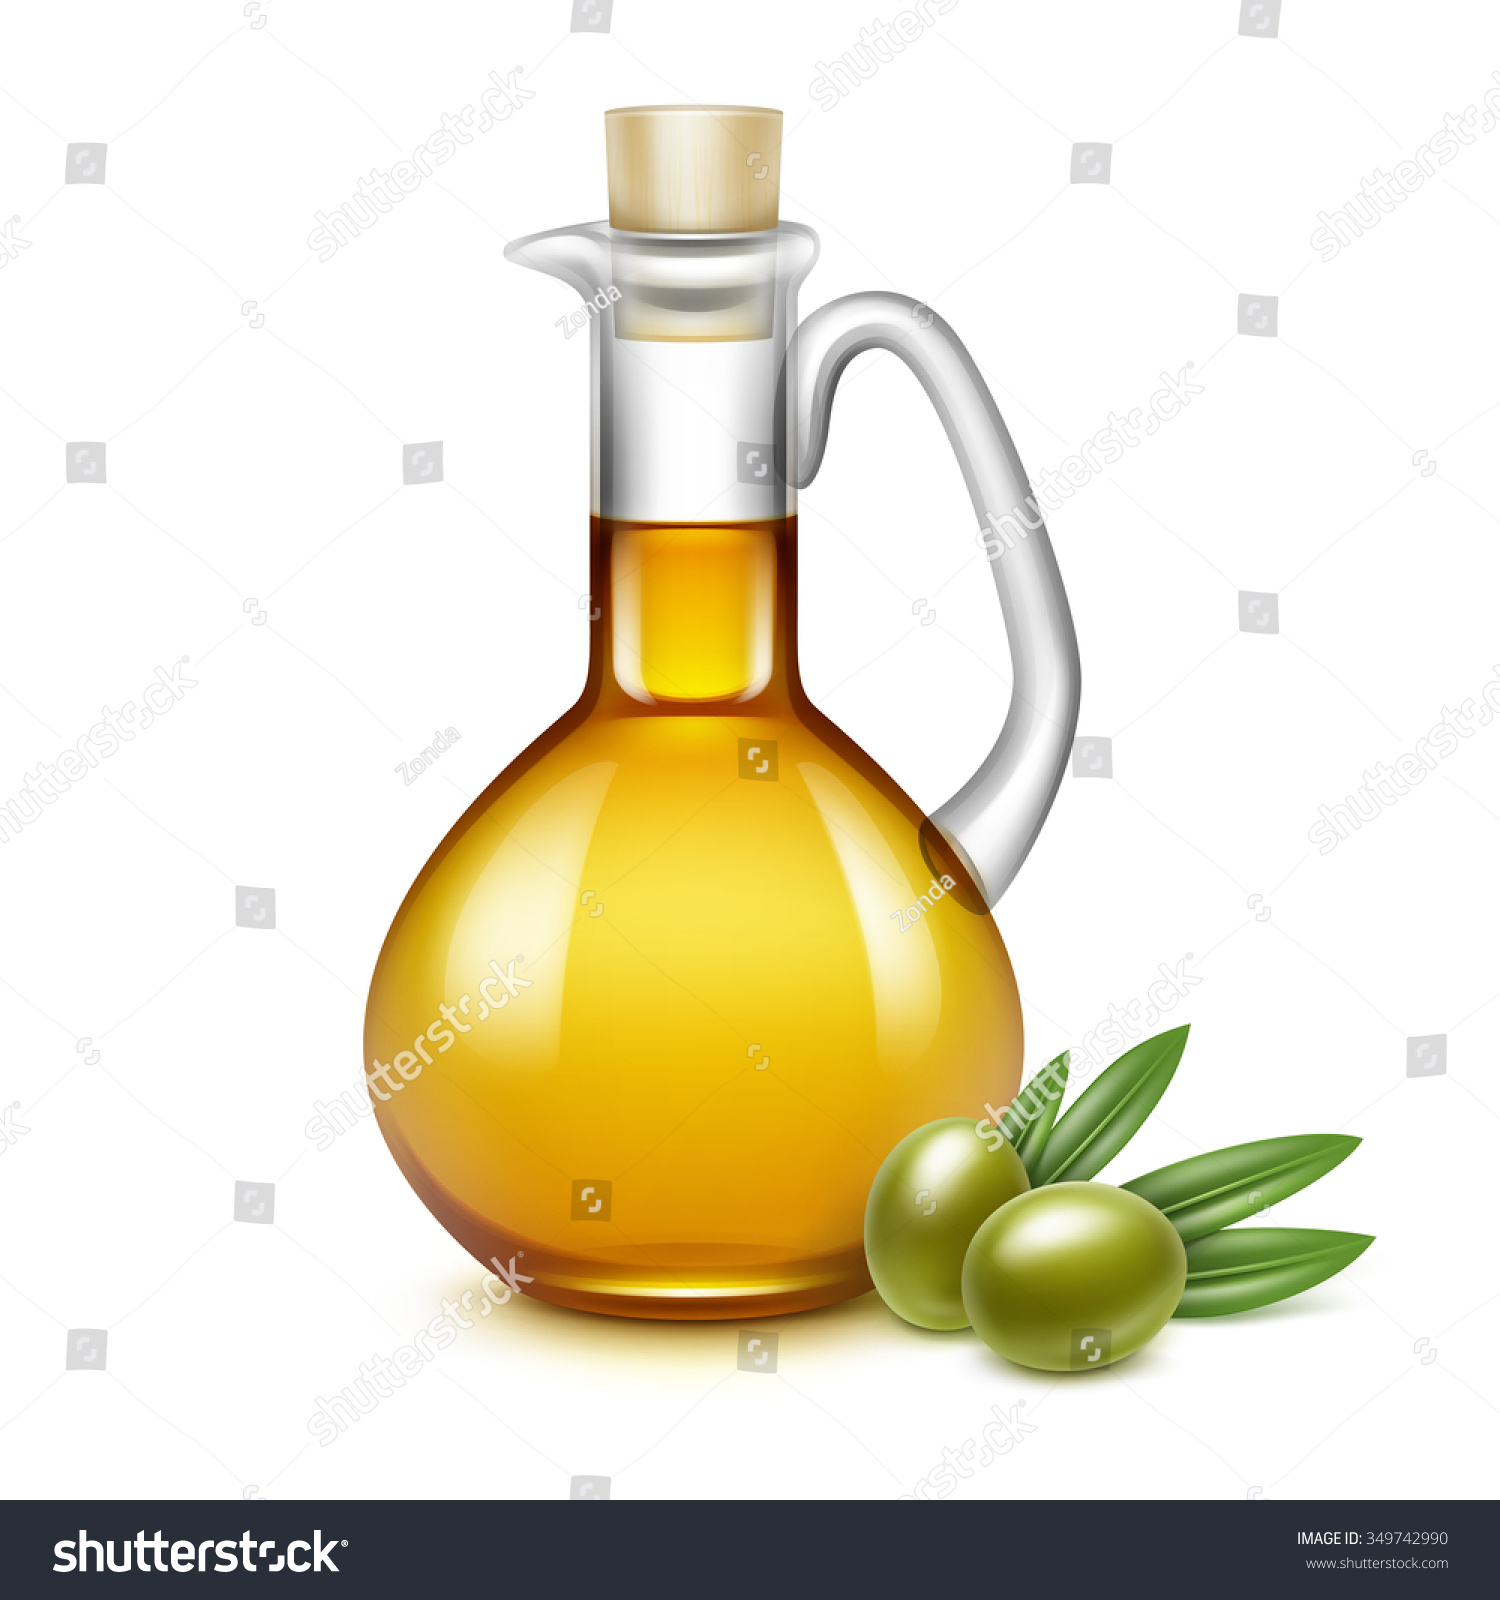 Vector Olive Oil Glass Jug Pitcher Stock Vector Royalty Free 349742990 